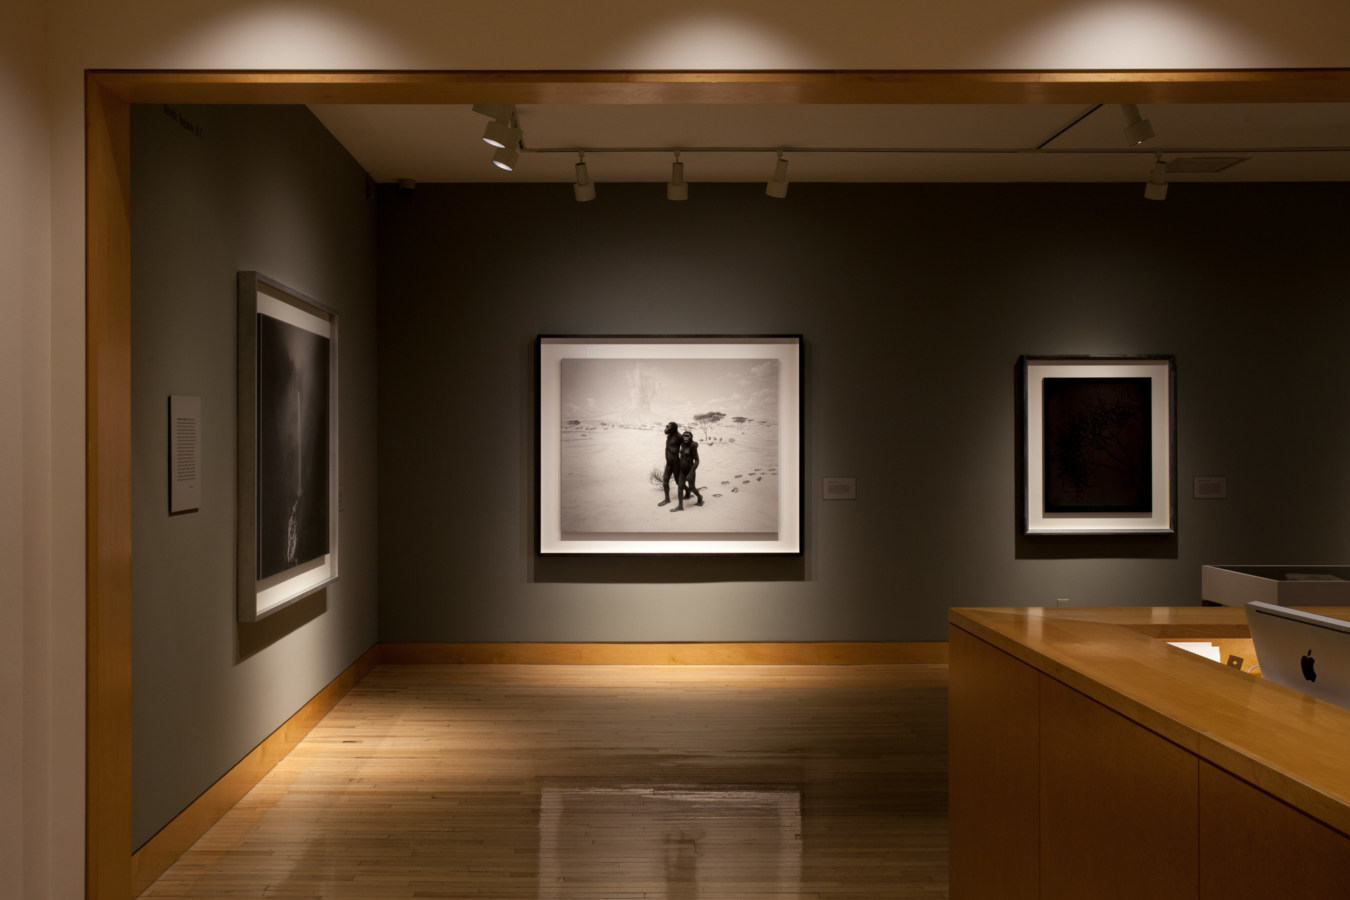 Installation photograph of gallery entryway exhibiting framed photographs on grey gallery walls